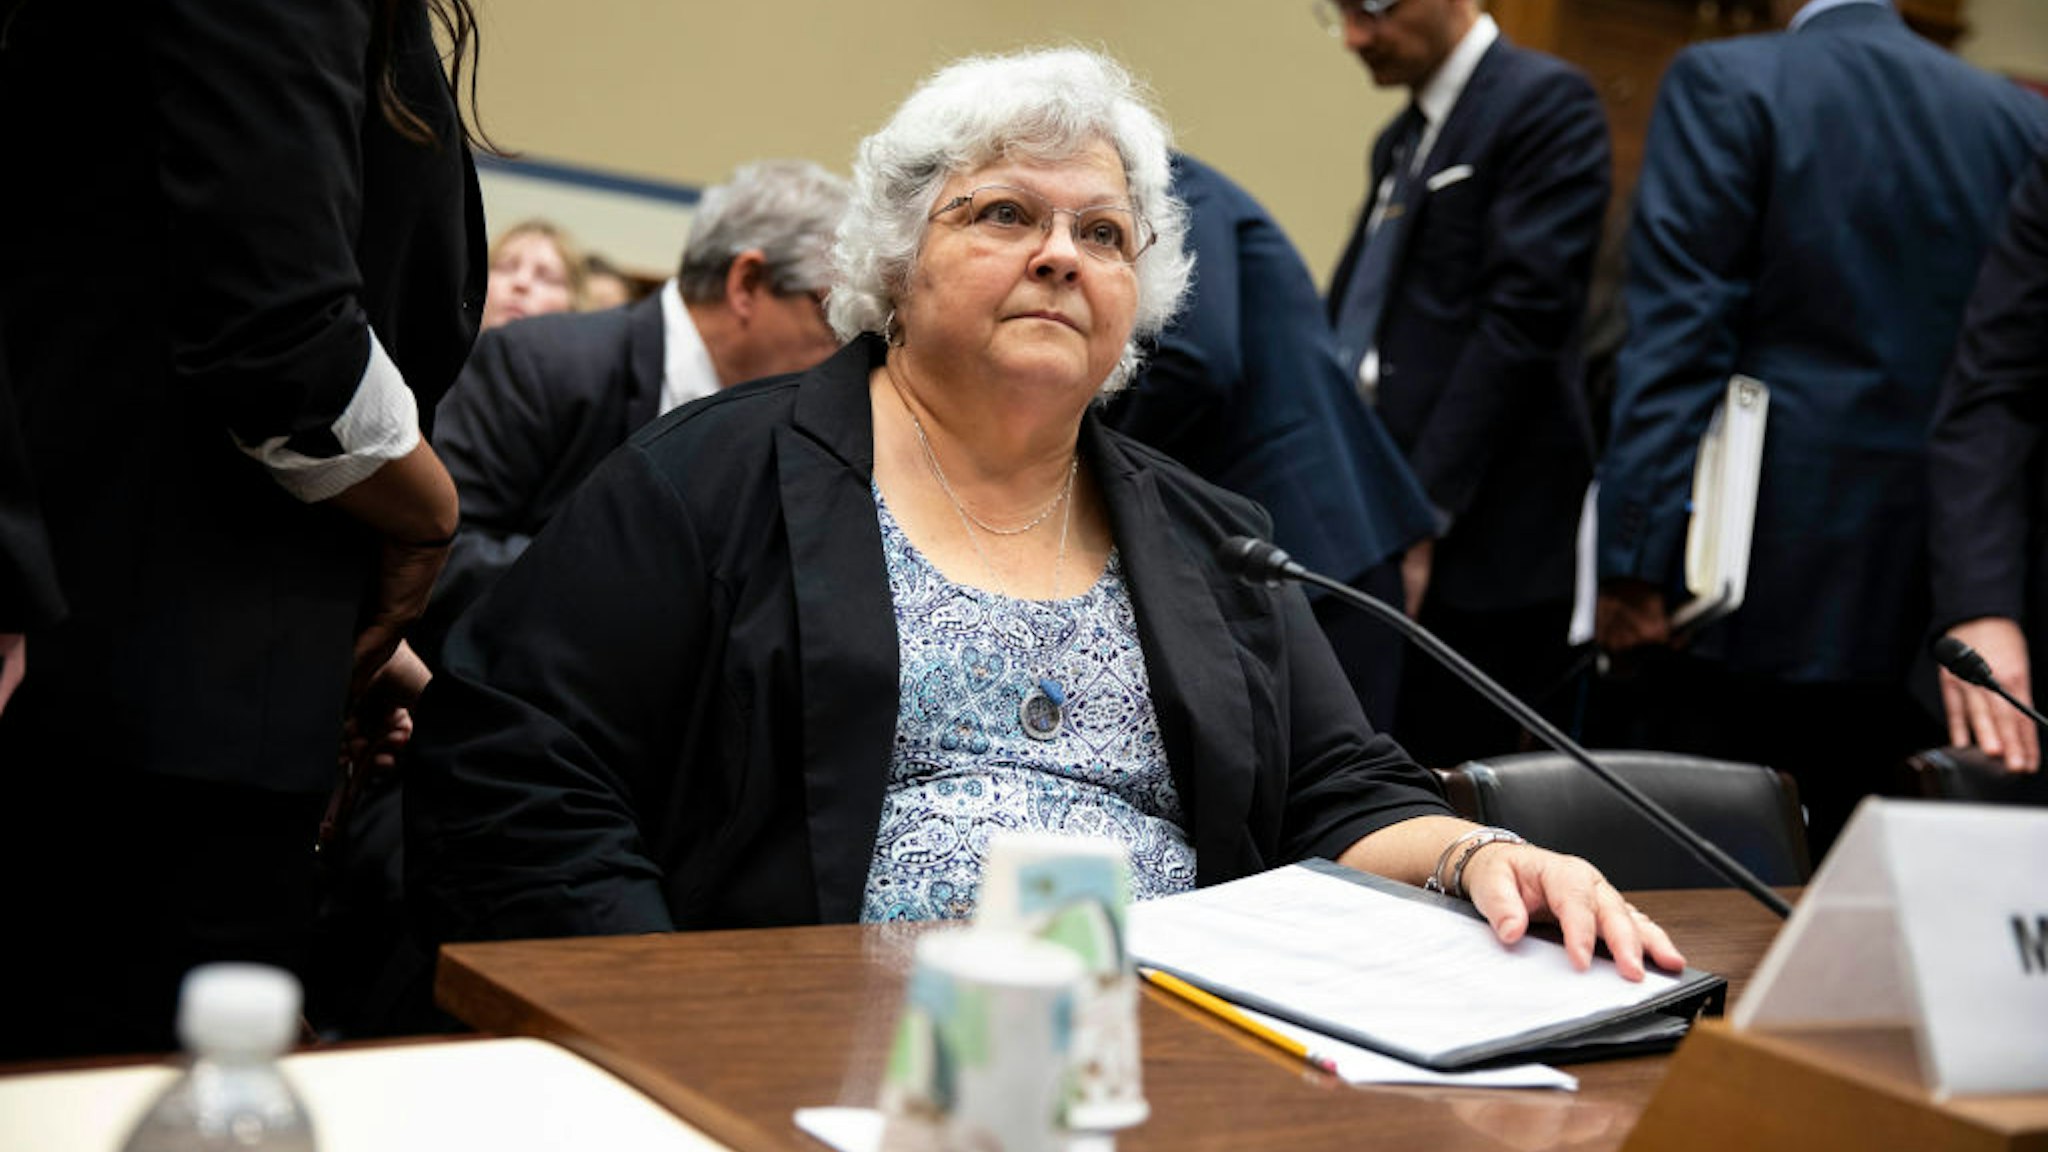 Susan Bro, mother of Heather Heyer arrives to a House Civil Rights and Civil Liberties Subcommittee hearing on confronting white supremacy at the U.S. Capitol on May 15, 2019 in Washington, DC.